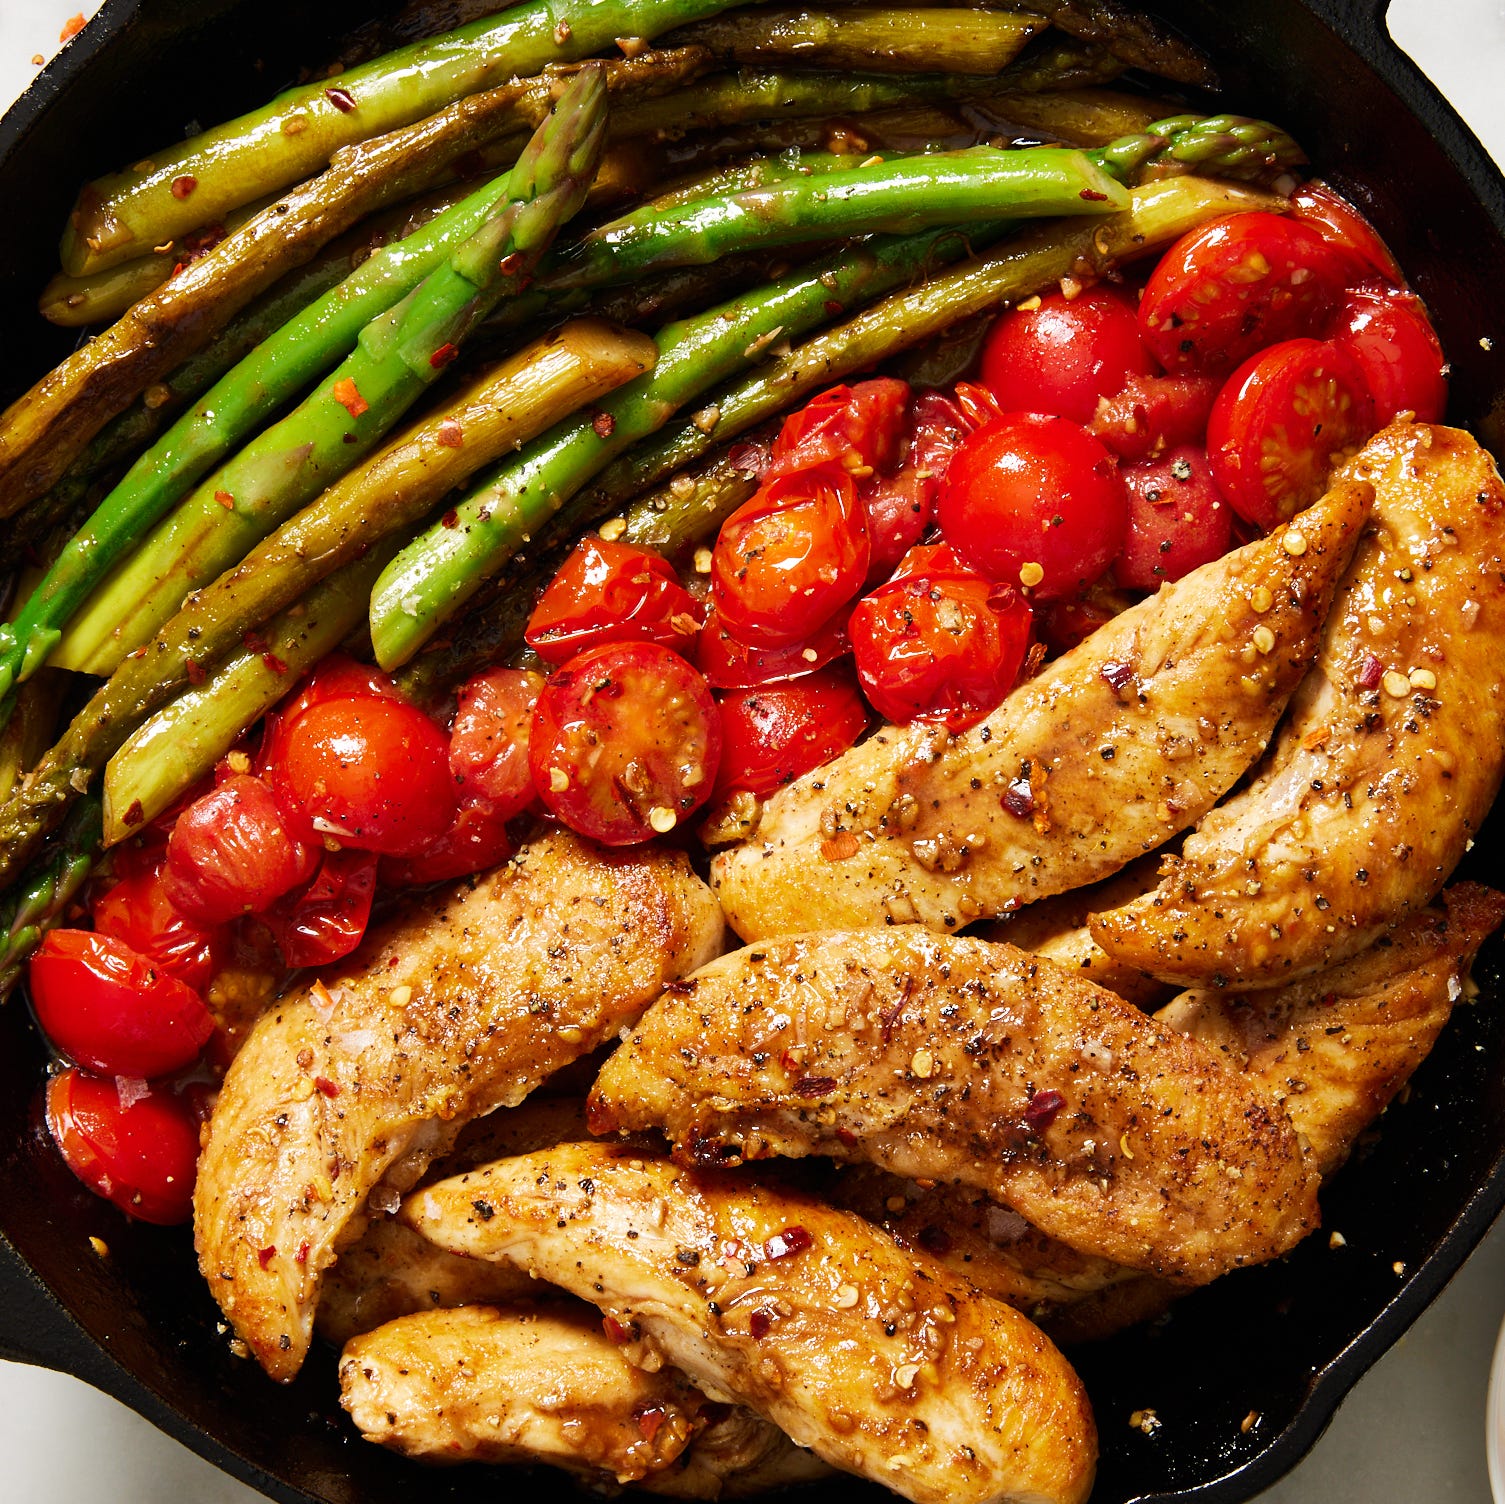 Homemade Balsamic Glaze Makes This Chicken And Asparagus Dish Extra Special